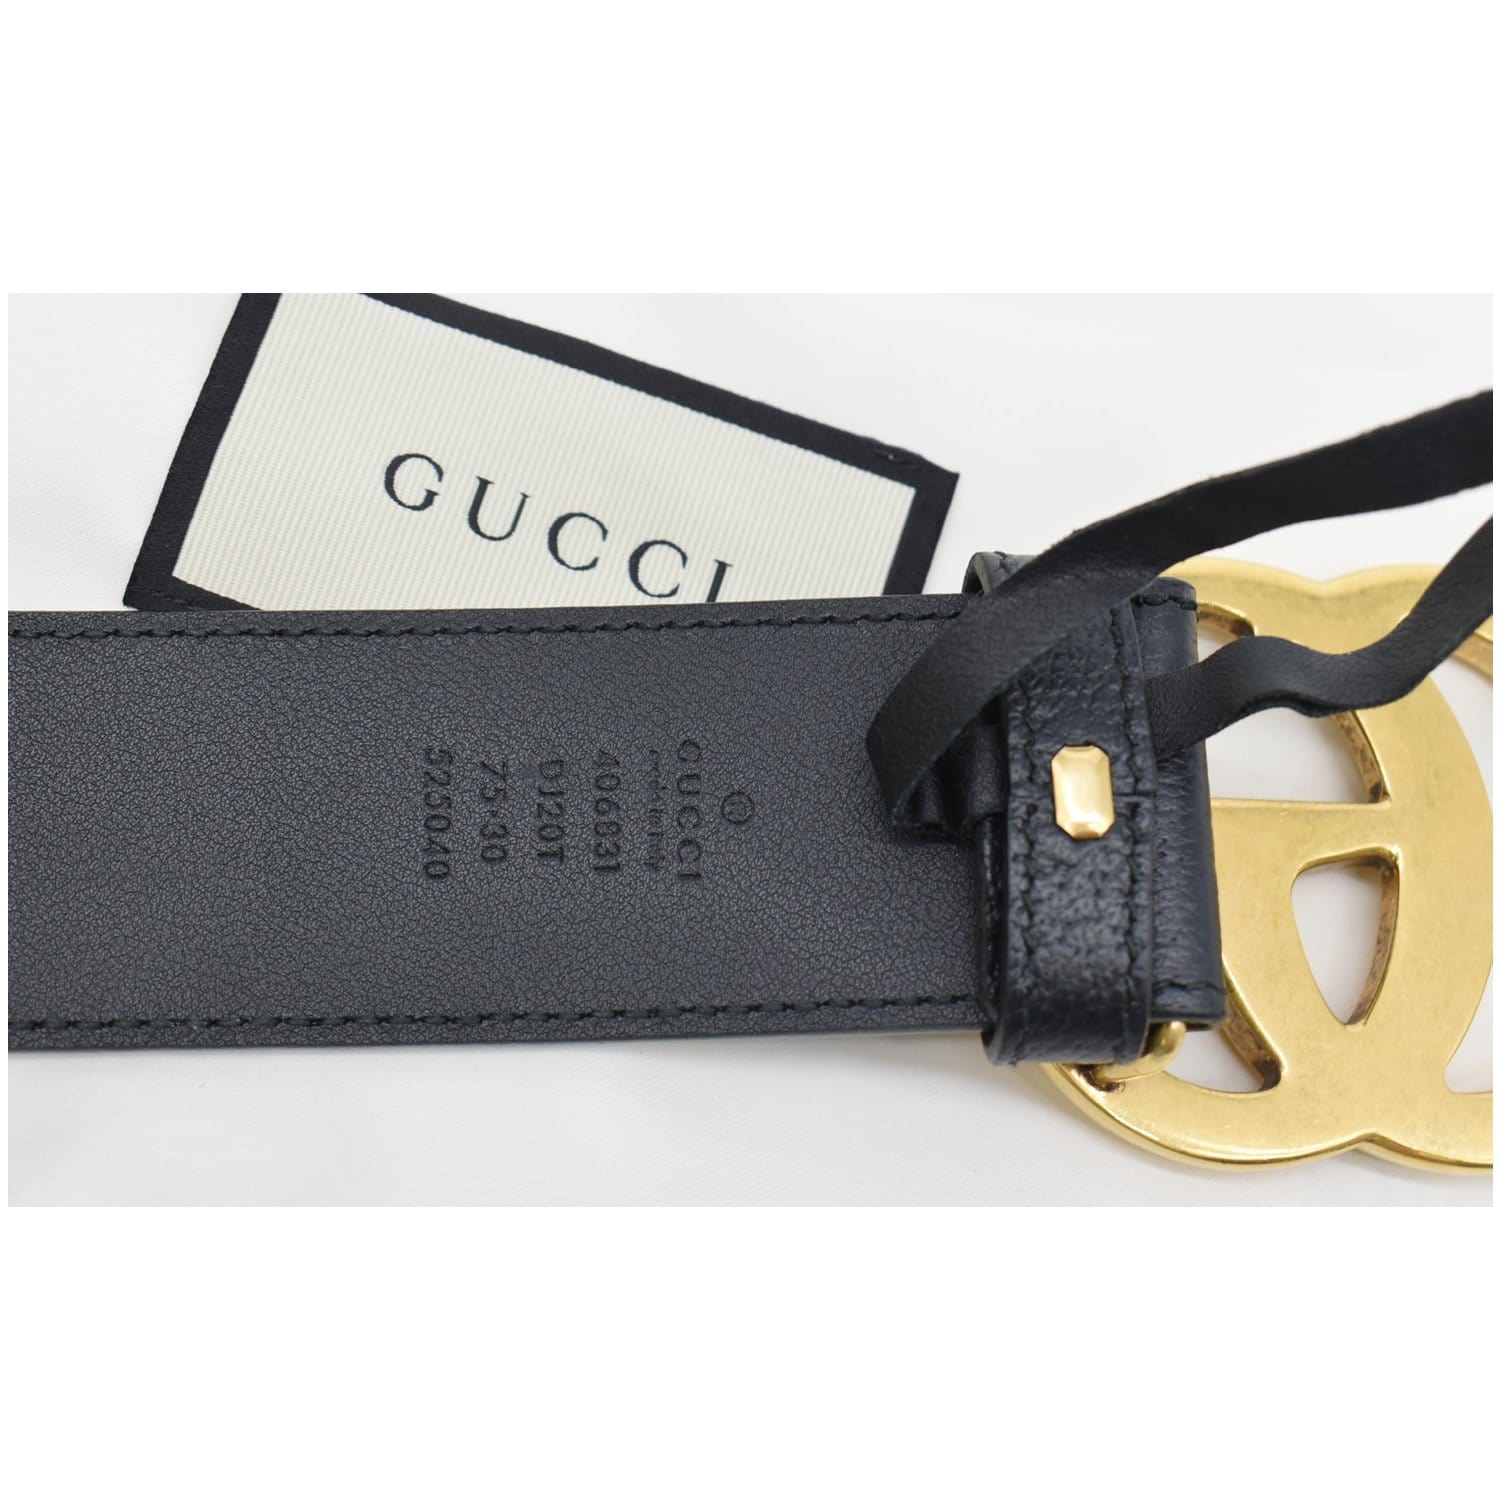 Gucci Women's Faded Leather Belt with Double G Buckle